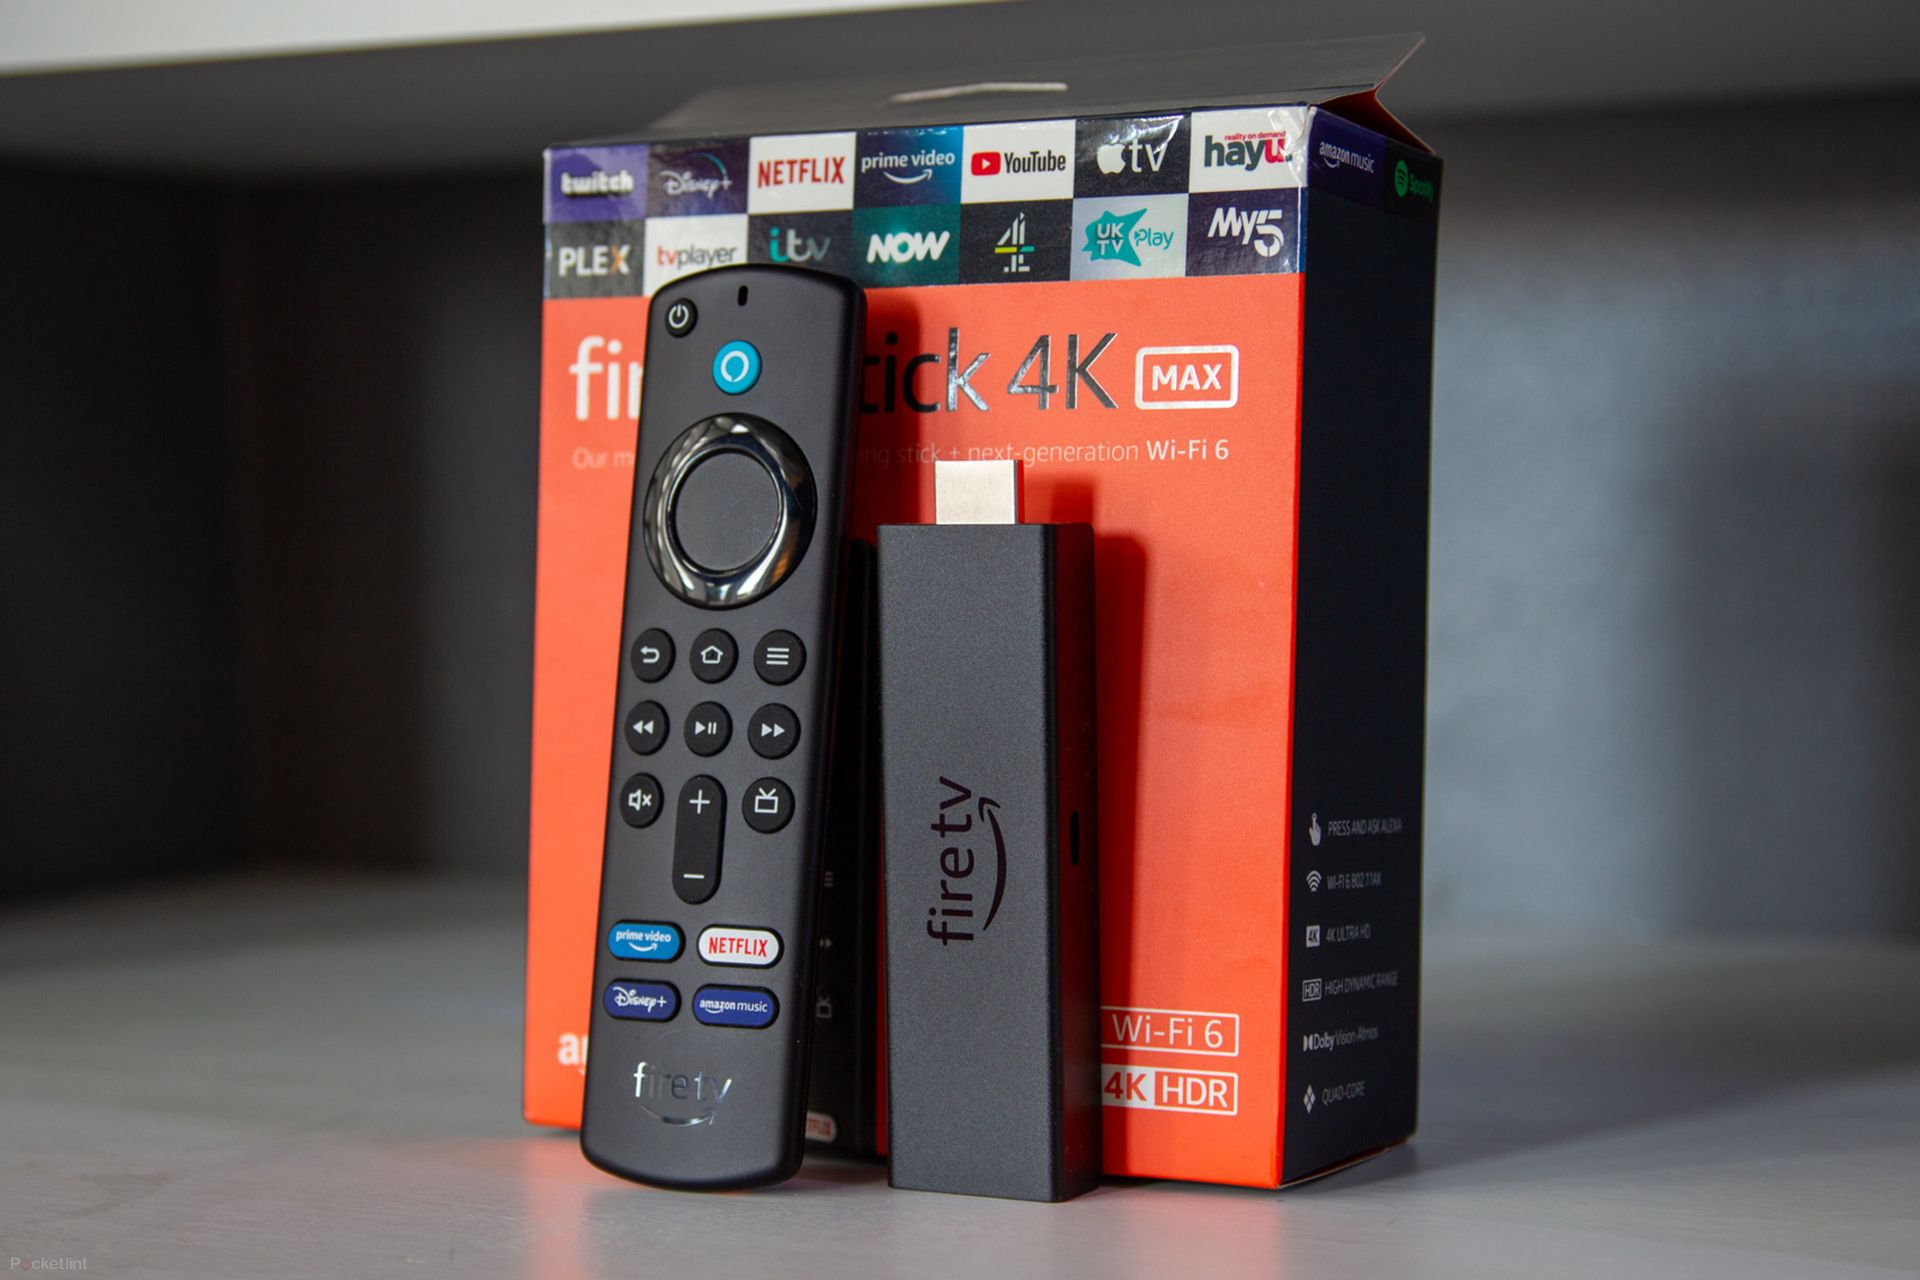 In this article, we are going to covering how to reconnect Firestick remote, so you can enjoy watching your favorite shows and movies without any issues.